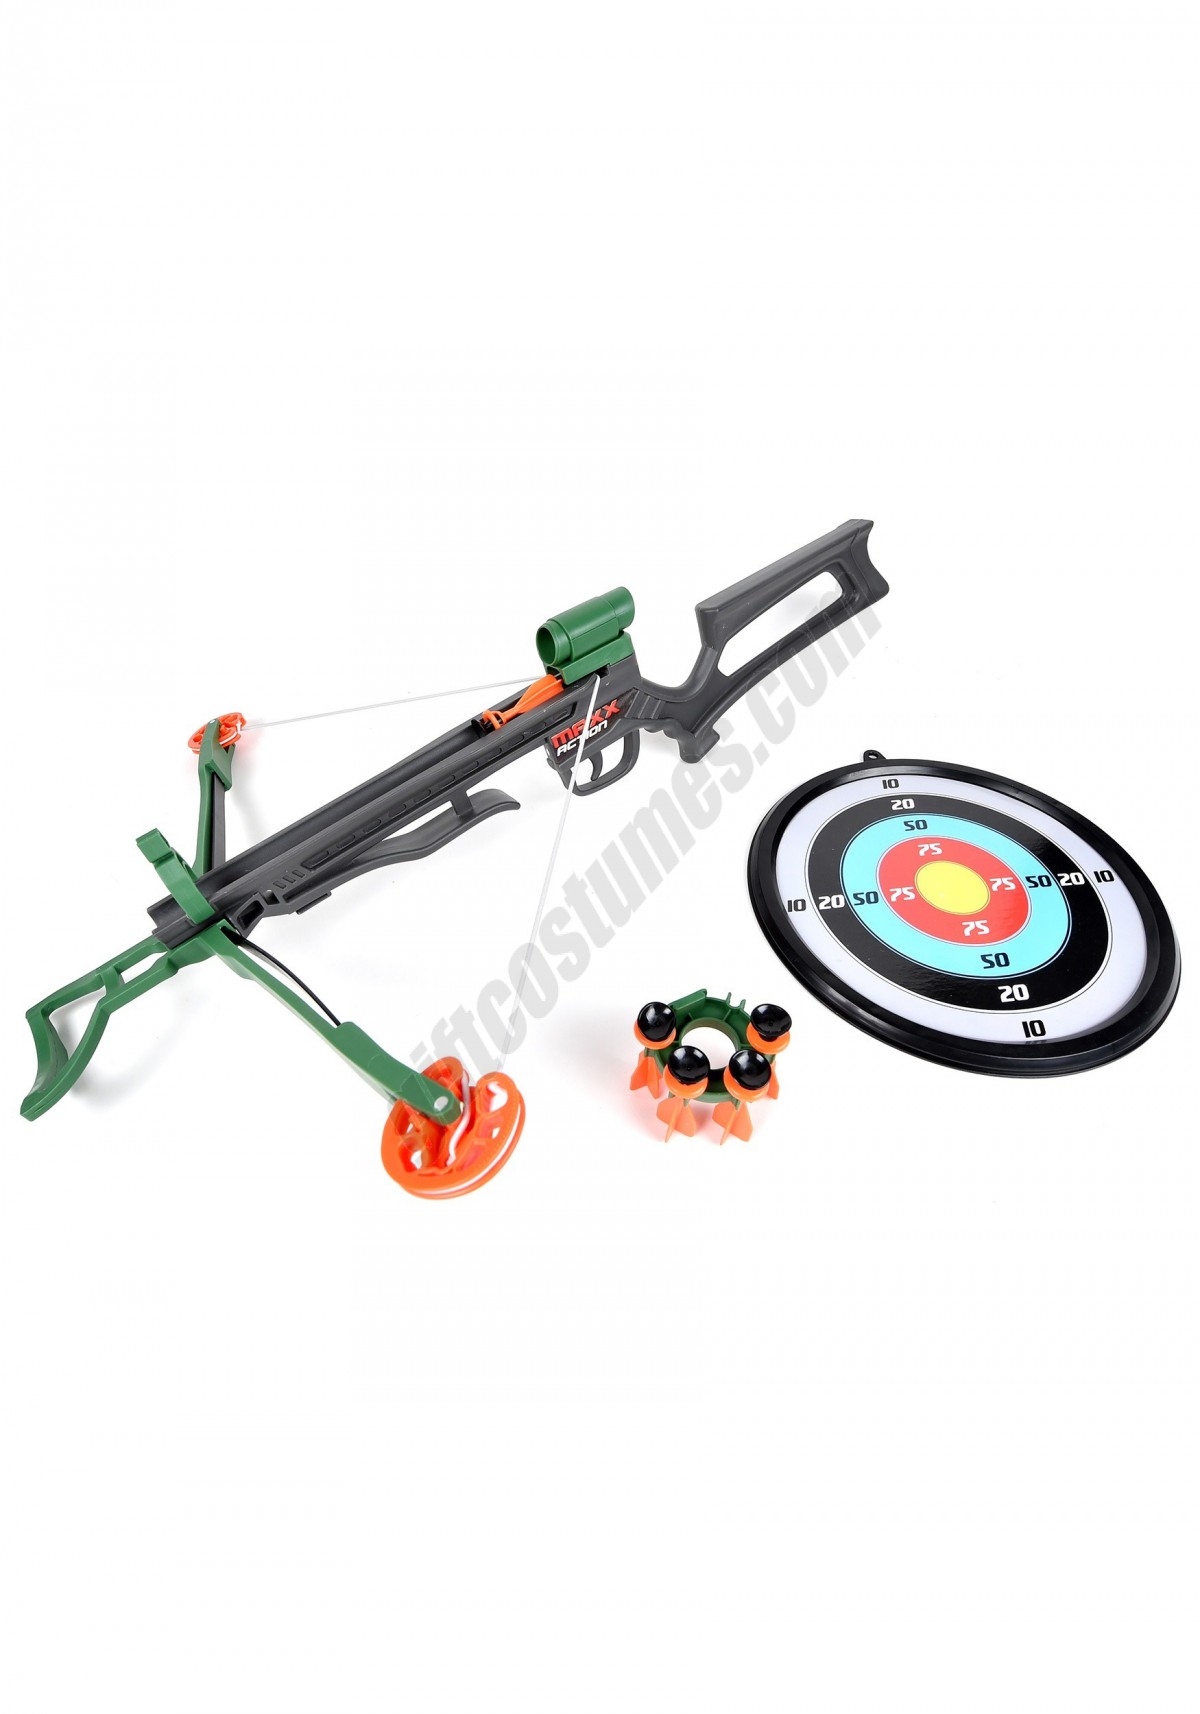 MAXX Action Hunting Series Deluxe Crossbow Accessory Promotions - -0